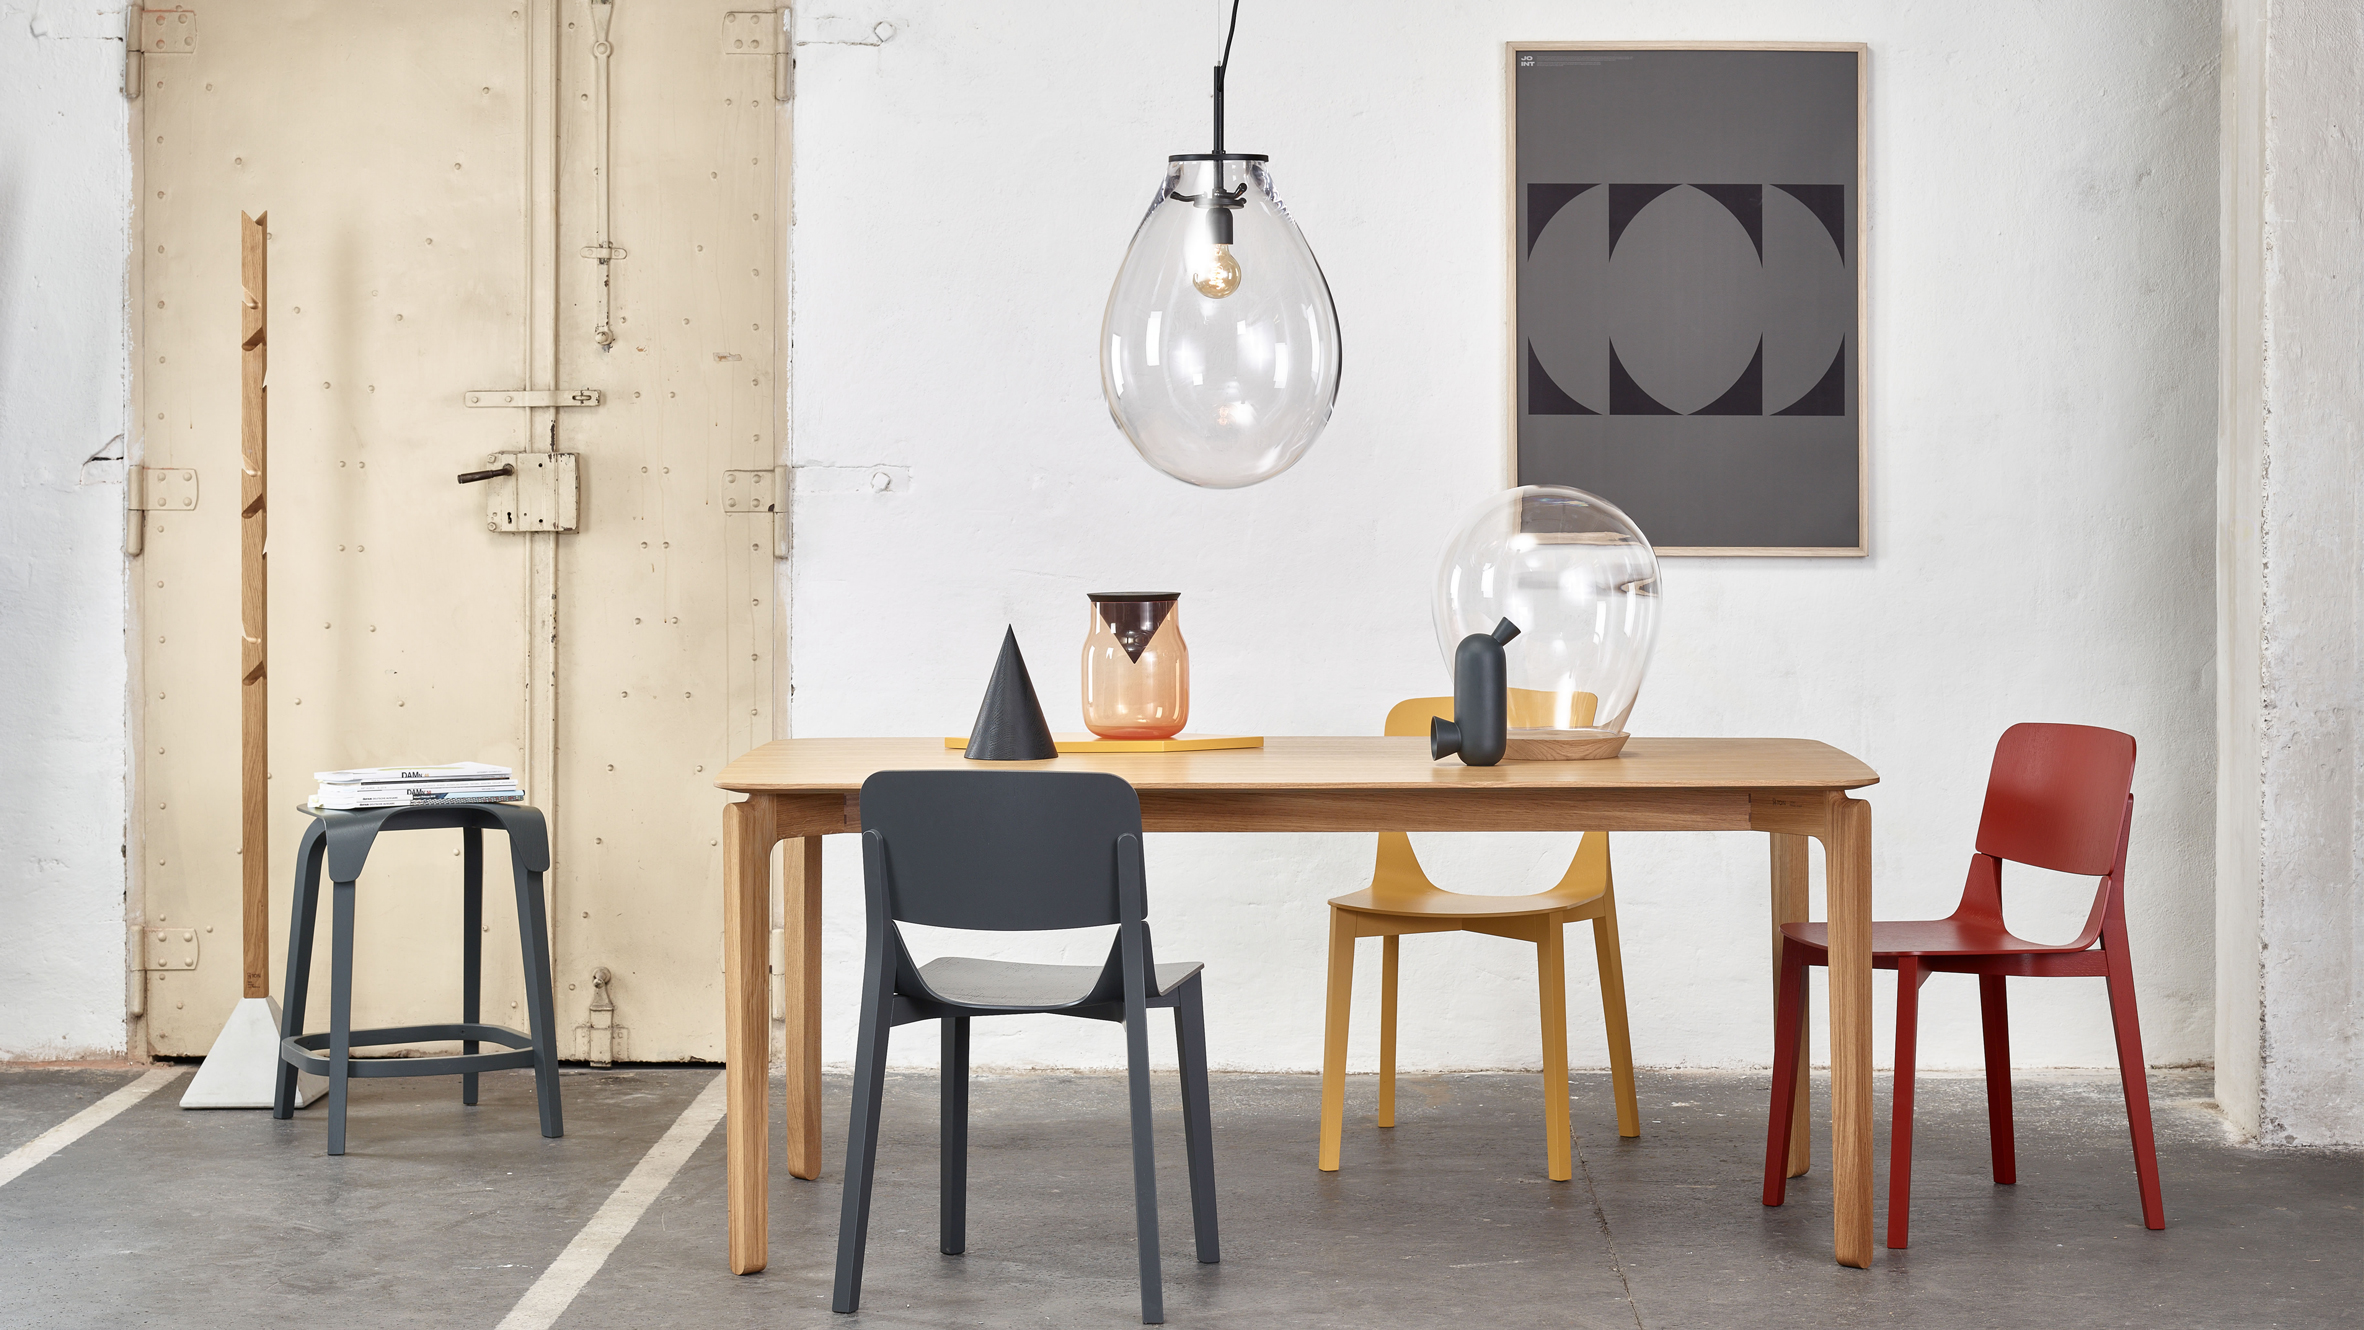 IMM Cologne Design News and Highlights from IMM Cologne leaf furniture eggs design studio ton imm cologne 2017 dezeen hero